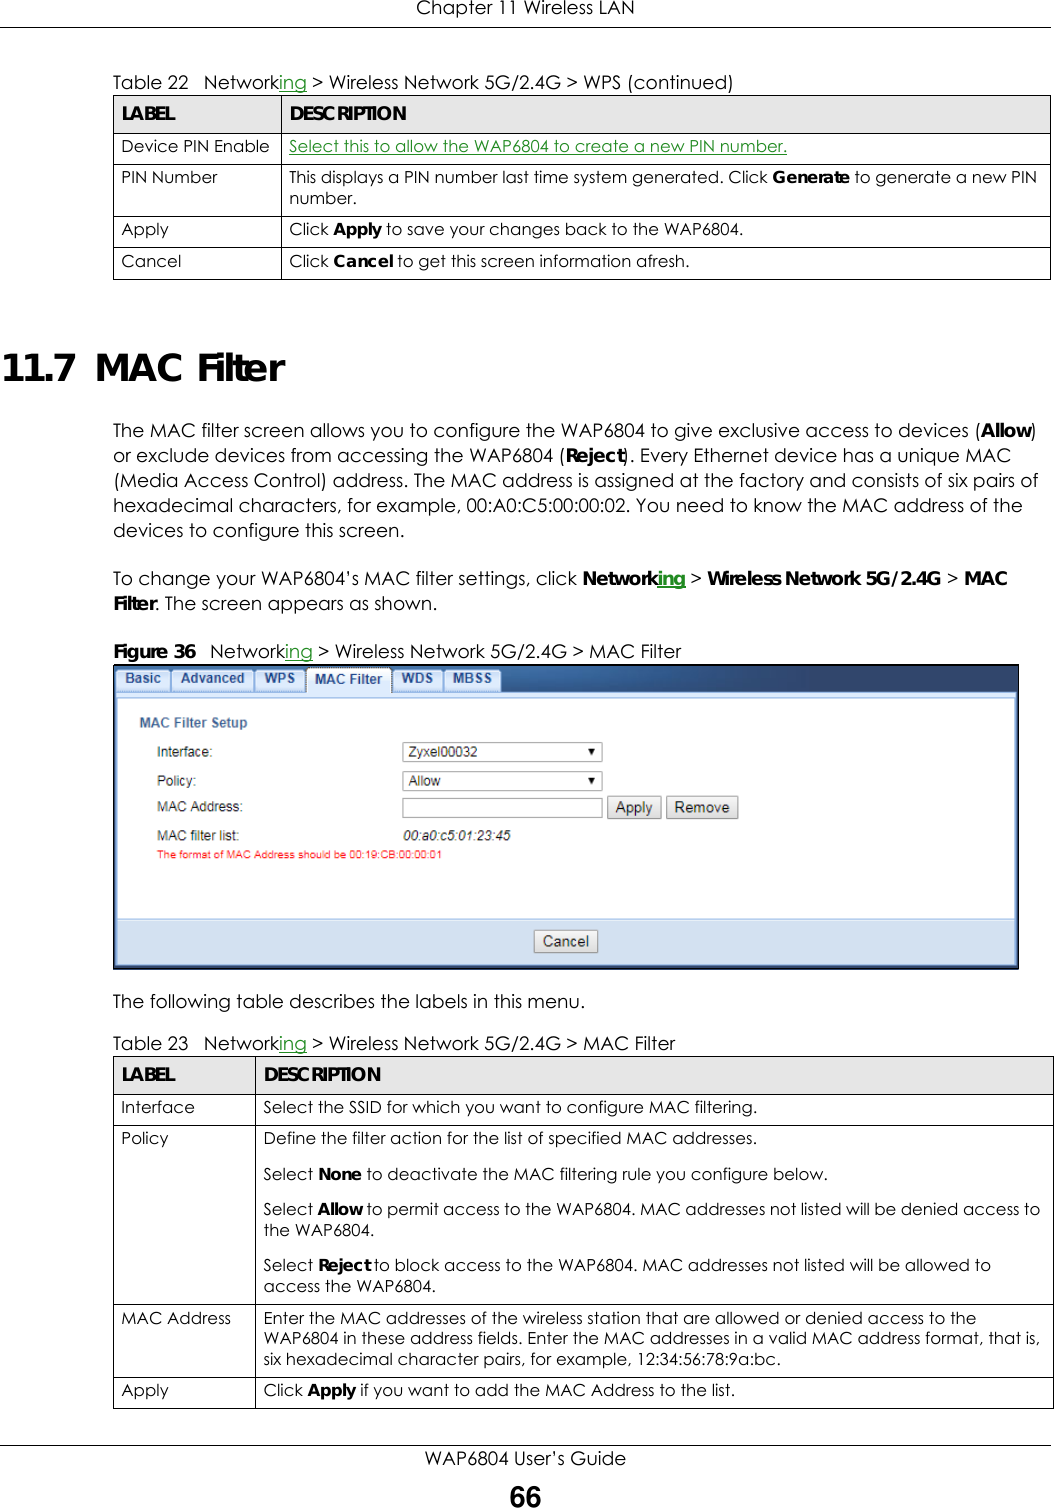 Chapter 11 Wireless LANWAP6804 User’s Guide6611.7  MAC FilterThe MAC filter screen allows you to configure the WAP6804 to give exclusive access to devices (Allow) or exclude devices from accessing the WAP6804 (Reject). Every Ethernet device has a unique MAC (Media Access Control) address. The MAC address is assigned at the factory and consists of six pairs of hexadecimal characters, for example, 00:A0:C5:00:00:02. You need to know the MAC address of the devices to configure this screen.To change your WAP6804’s MAC filter settings, click Networking &gt; Wireless Network 5G/2.4G &gt; MAC Filter. The screen appears as shown.Figure 36   Networking &gt; Wireless Network 5G/2.4G &gt; MAC FilterThe following table describes the labels in this menu.Device PIN Enable Select this to allow the WAP6804 to create a new PIN number.PIN Number This displays a PIN number last time system generated. Click Generate to generate a new PIN number.Apply Click Apply to save your changes back to the WAP6804.Cancel Click Cancel to get this screen information afresh.Table 22   Networking &gt; Wireless Network 5G/2.4G &gt; WPS (continued)LABEL DESCRIPTIONTable 23   Networking &gt; Wireless Network 5G/2.4G &gt; MAC FilterLABEL DESCRIPTIONInterface Select the SSID for which you want to configure MAC filtering.Policy Define the filter action for the list of specified MAC addresses.Select None to deactivate the MAC filtering rule you configure below.Select Allow to permit access to the WAP6804. MAC addresses not listed will be denied access to the WAP6804.Select Reject to block access to the WAP6804. MAC addresses not listed will be allowed to access the WAP6804.MAC Address Enter the MAC addresses of the wireless station that are allowed or denied access to the WAP6804 in these address fields. Enter the MAC addresses in a valid MAC address format, that is, six hexadecimal character pairs, for example, 12:34:56:78:9a:bc.Apply Click Apply if you want to add the MAC Address to the list.